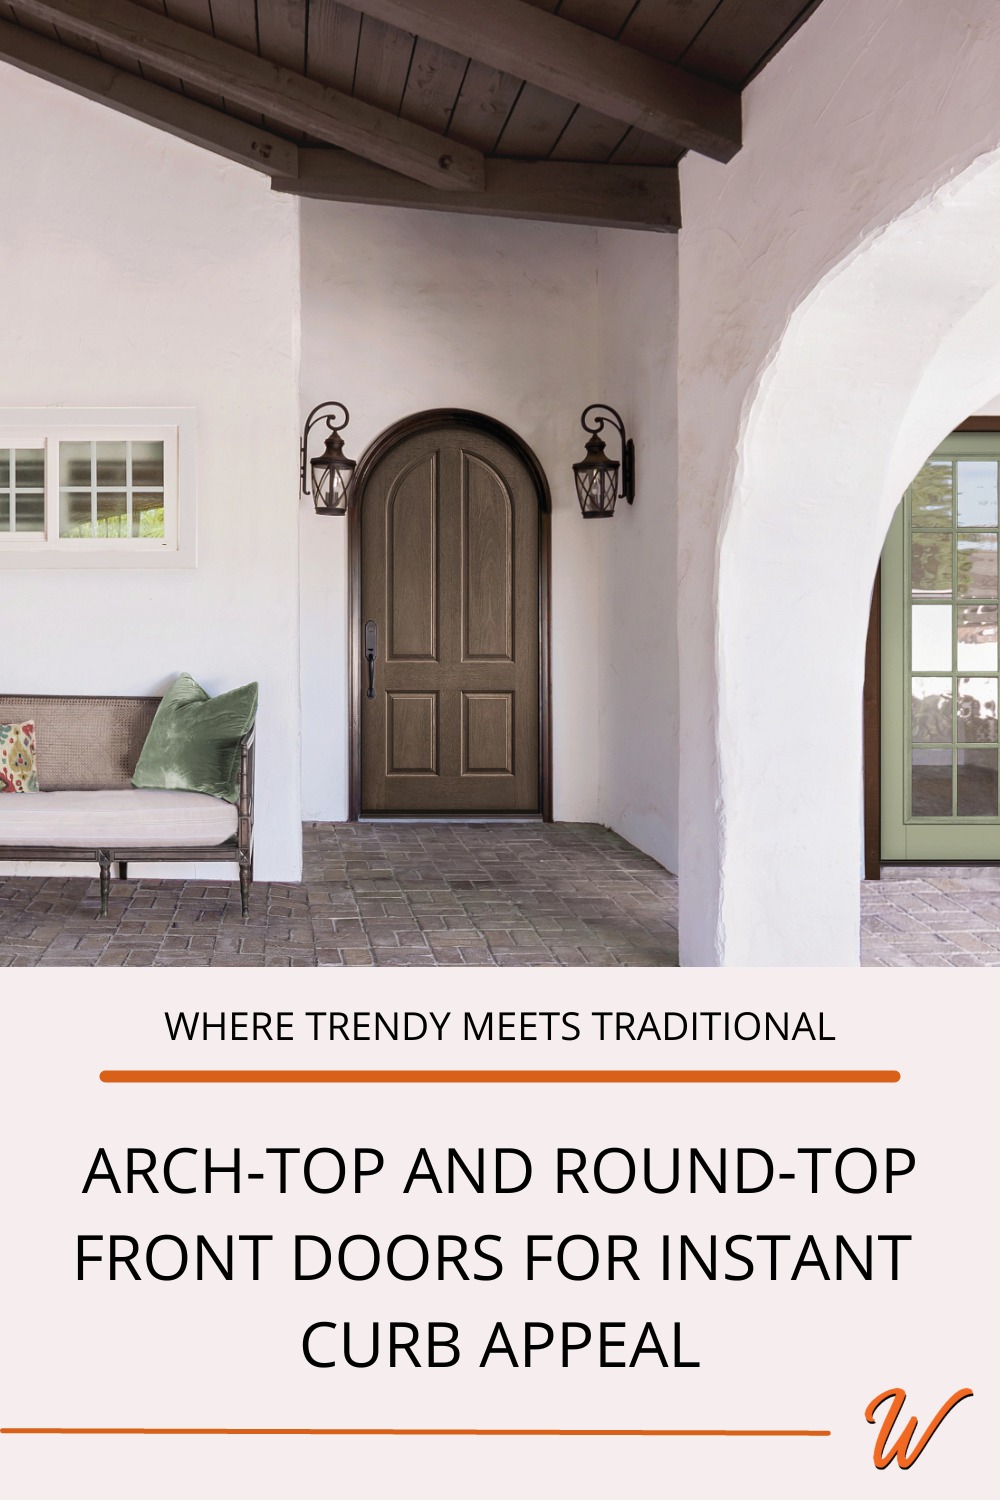 a wood round-top door in a Mediterranean style portico captioned with "where trendy meets traditional: Arch-top and round-top frond doors for instant curb appeal"